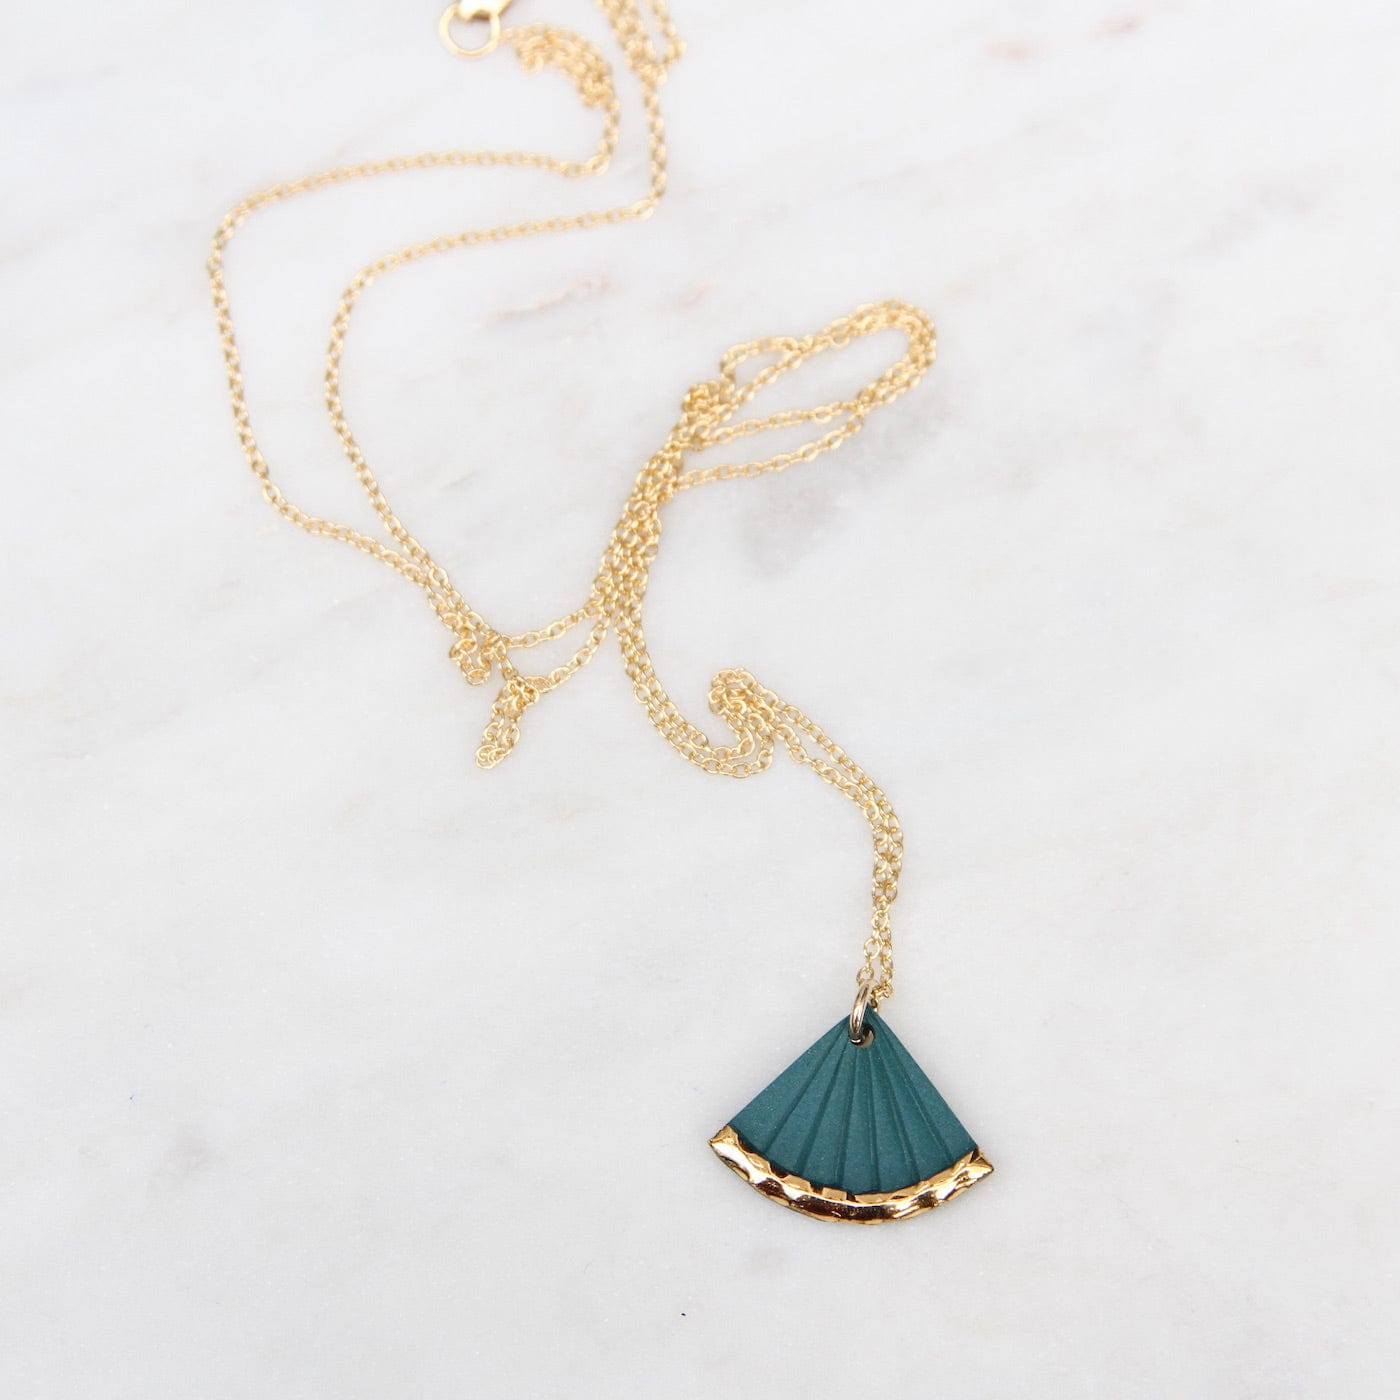 NKL-GF Gold Dipped Small Fan Necklace - Teal